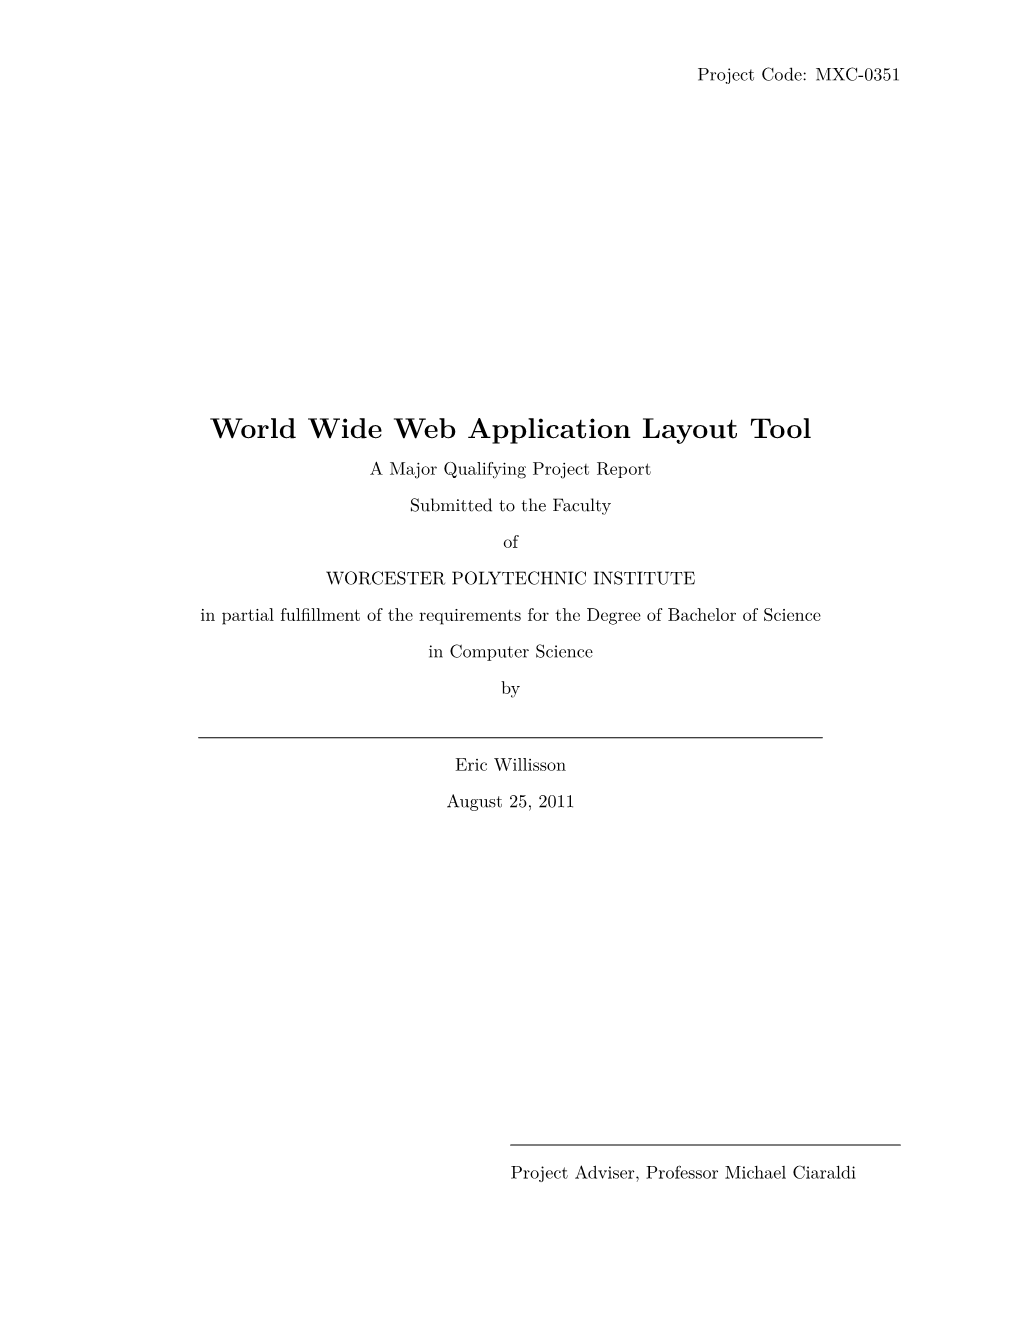 World Wide Web Application Layout Tool a Major Qualifying Project Report